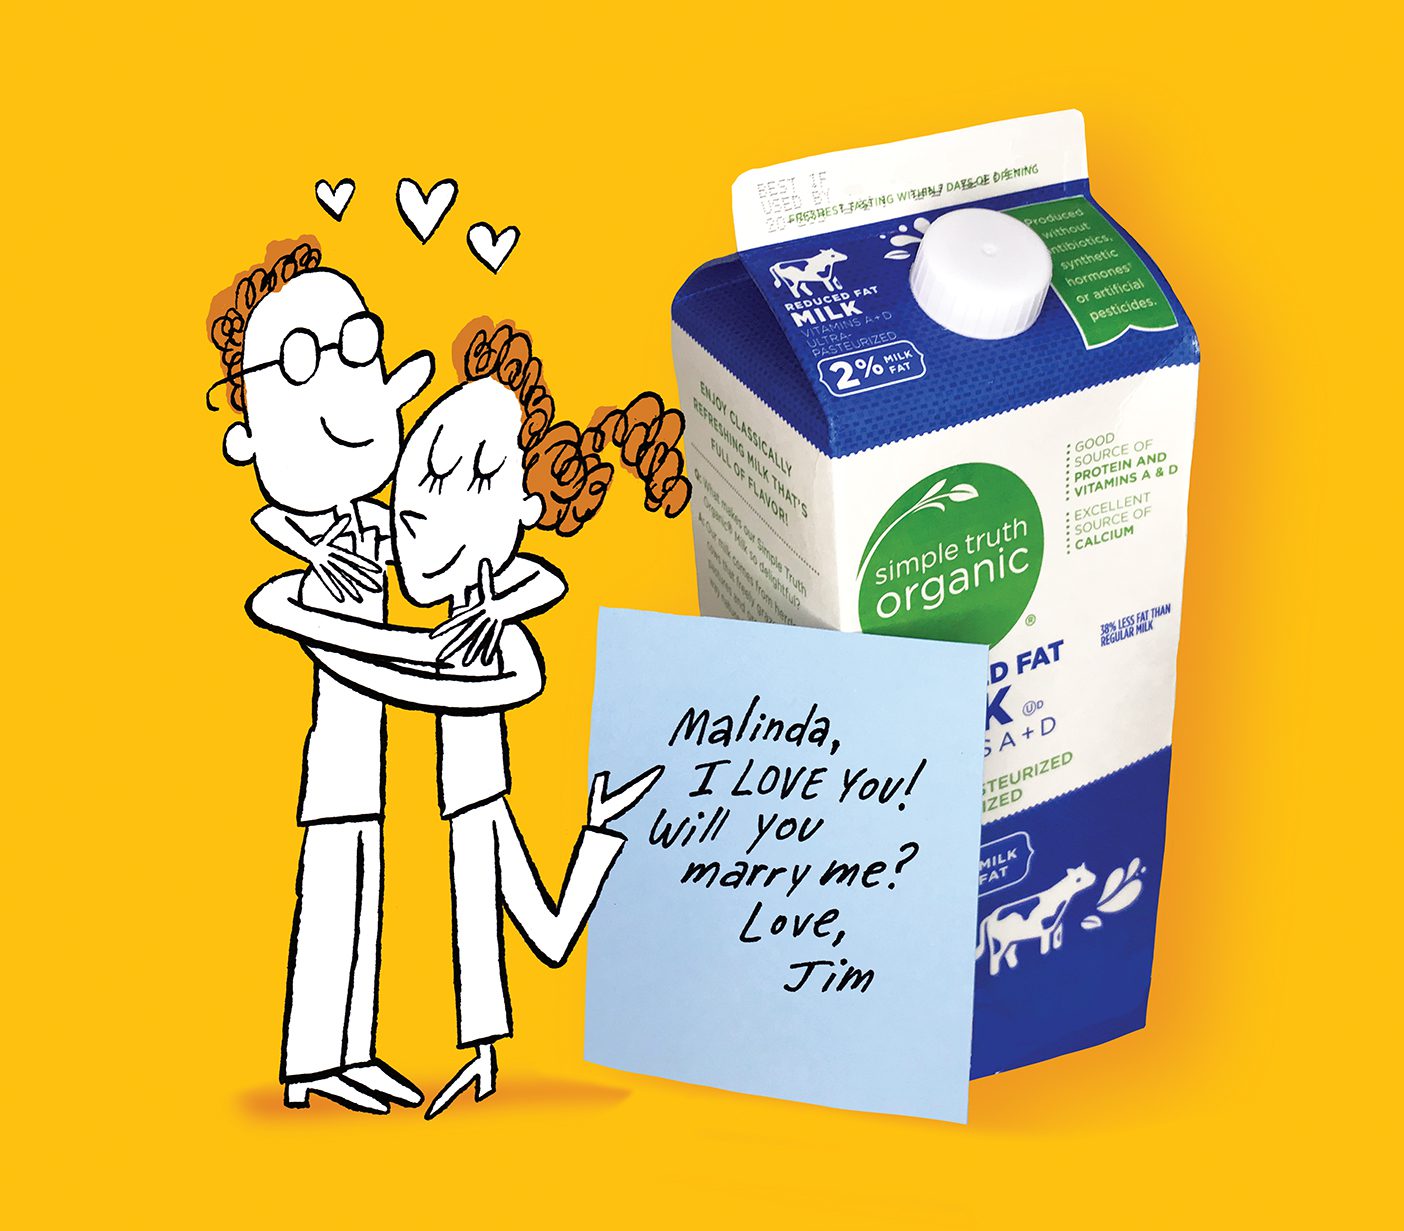 A cartoon couple embraces next to a carton of milk with a note that says Malinda I love you! Will you marry me? Love, Jim.